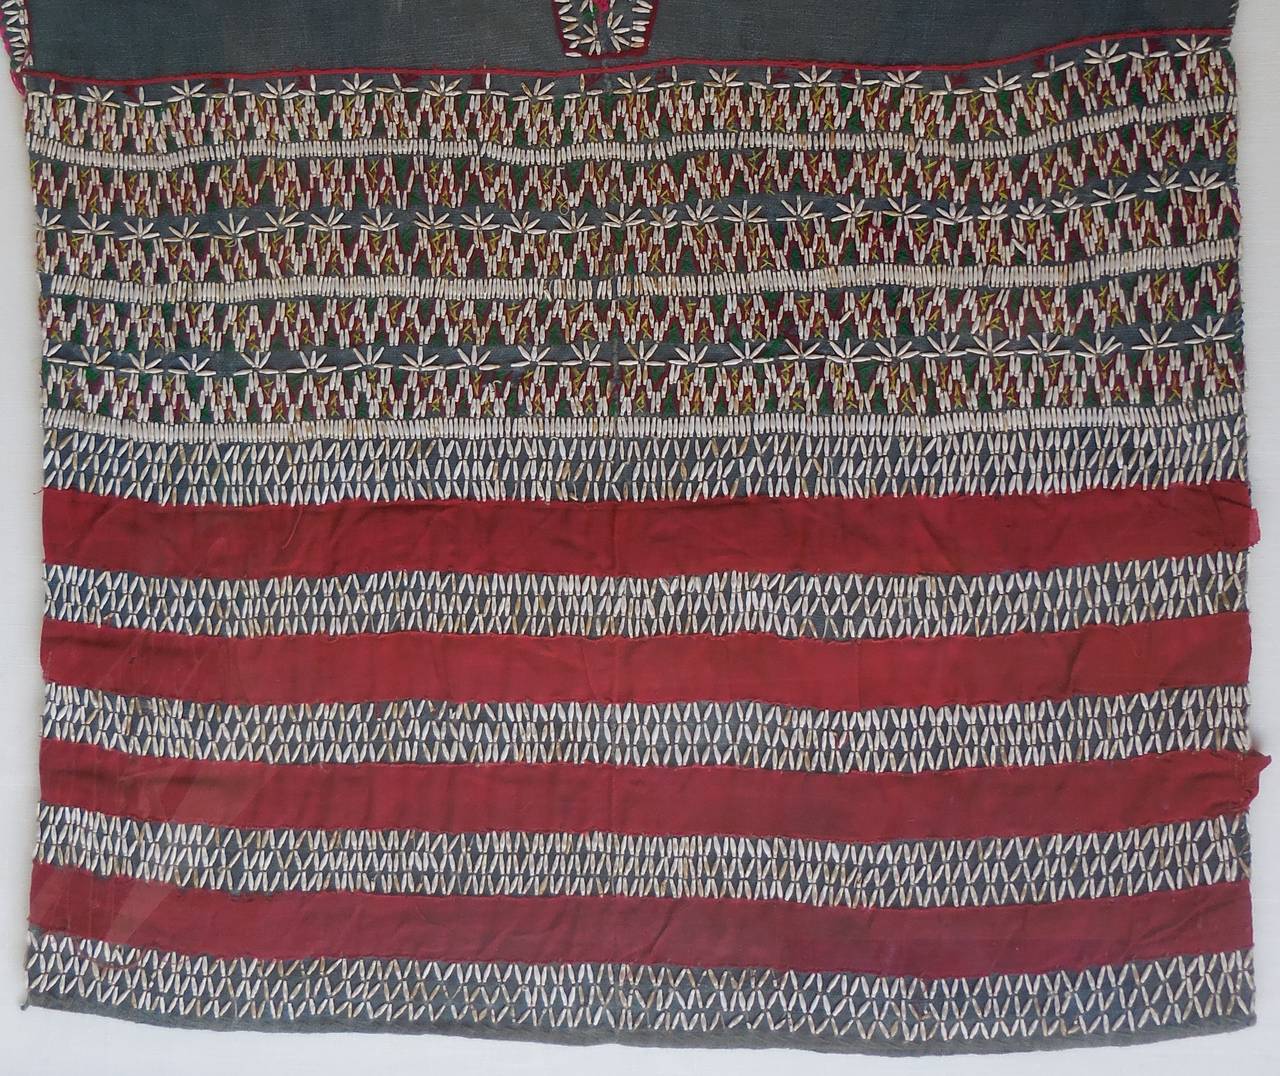 Mid-20th Century Vintage Hand Weave Tunic in Shadow Box